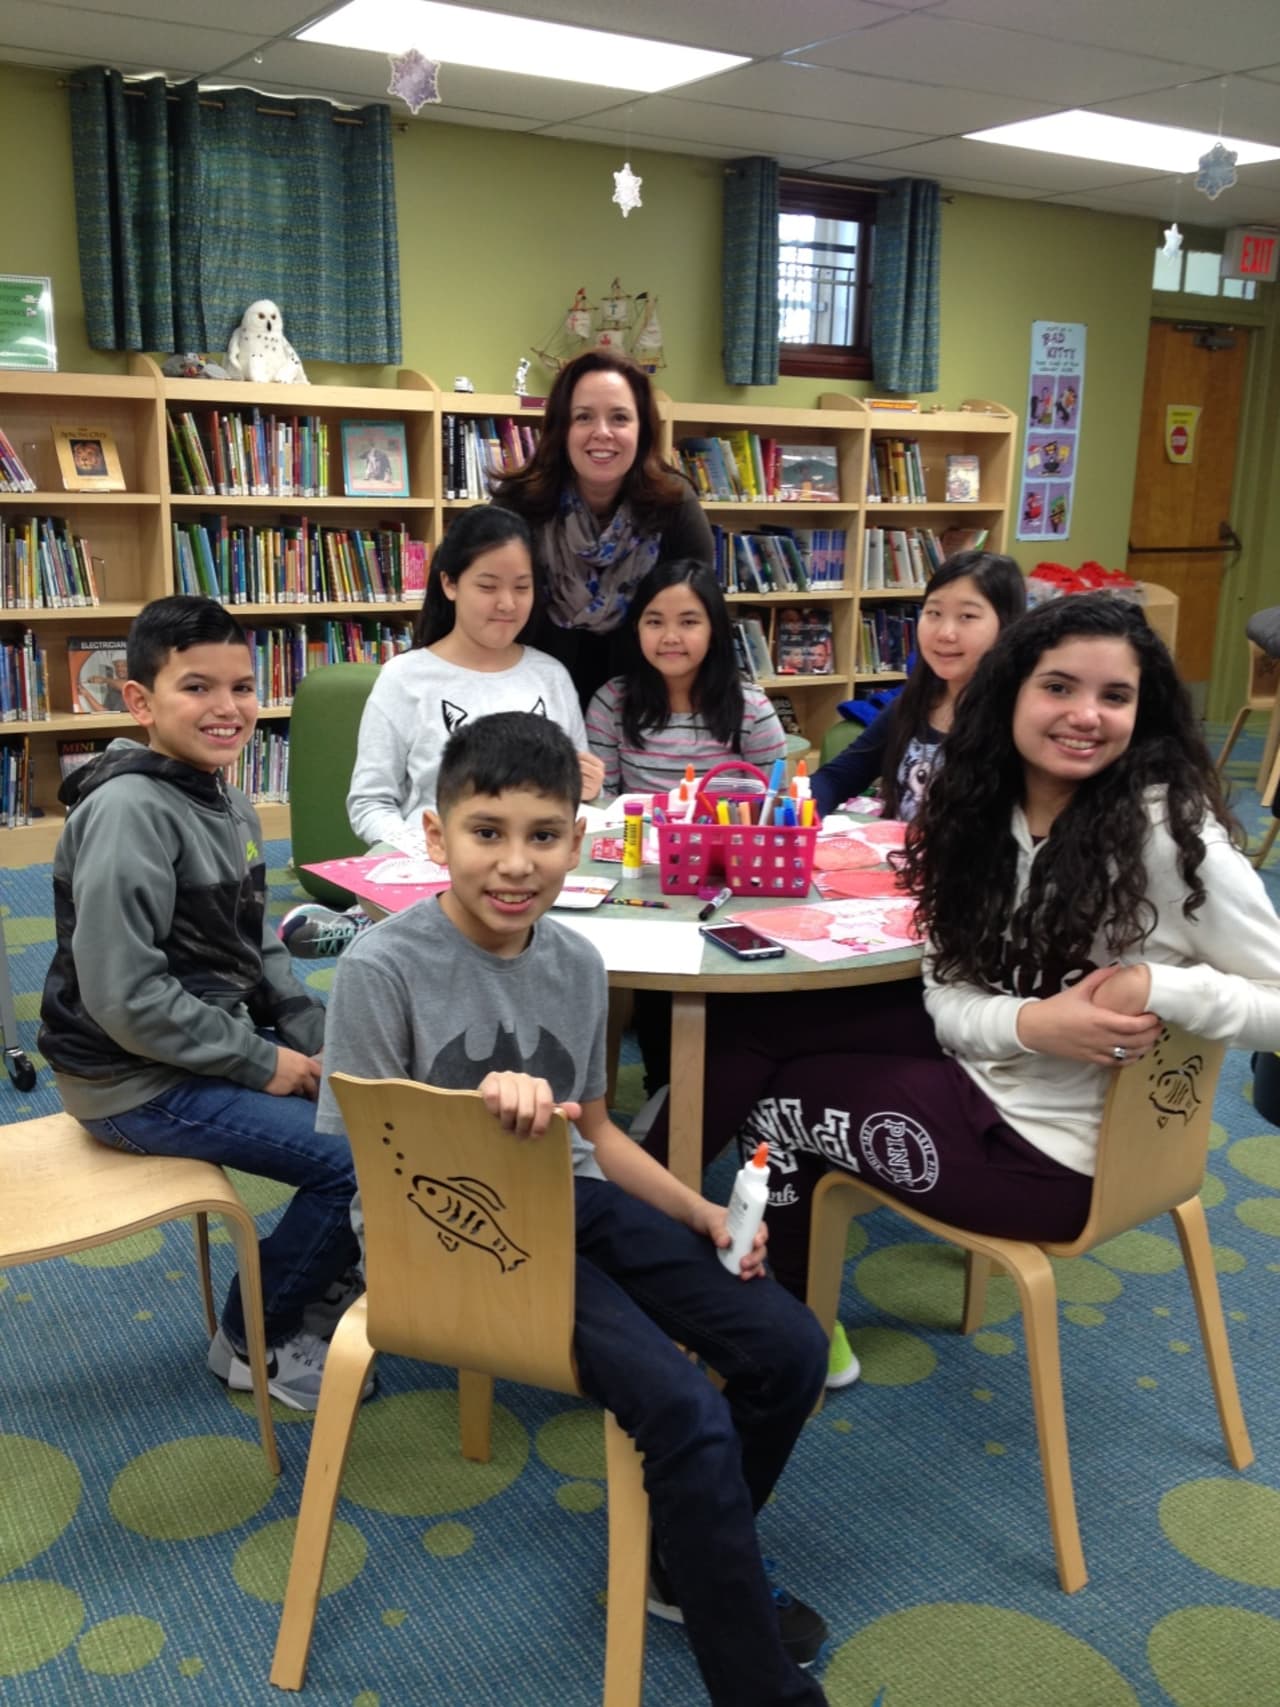 Children's Librarian Maria Russo with some kids at the East Rutherford Memorial Library.